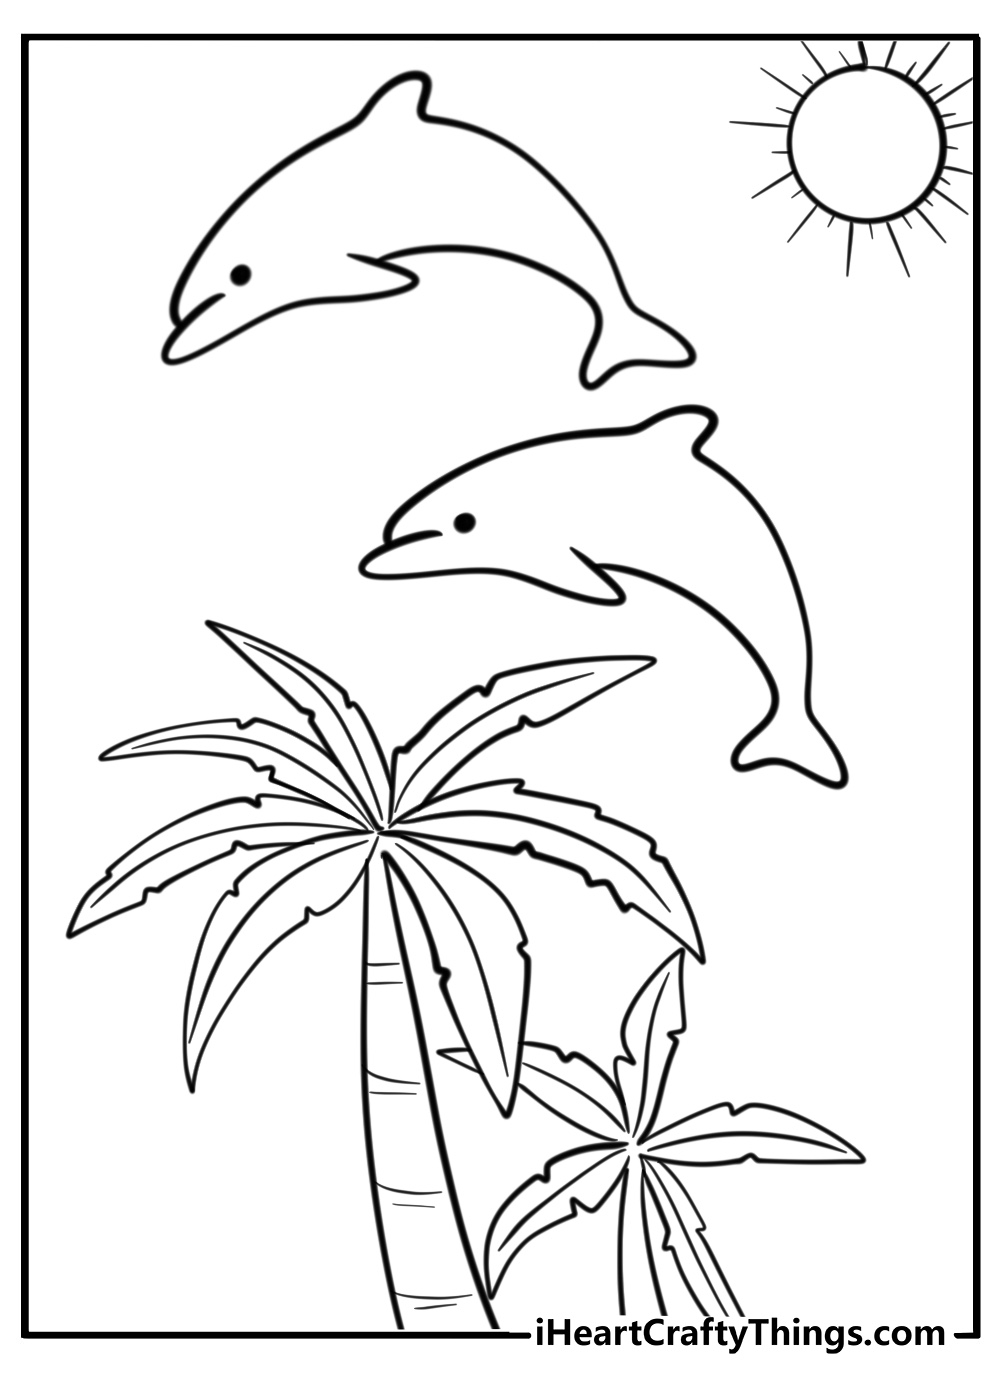 Two dolphins leaping over a palm tree coloring page